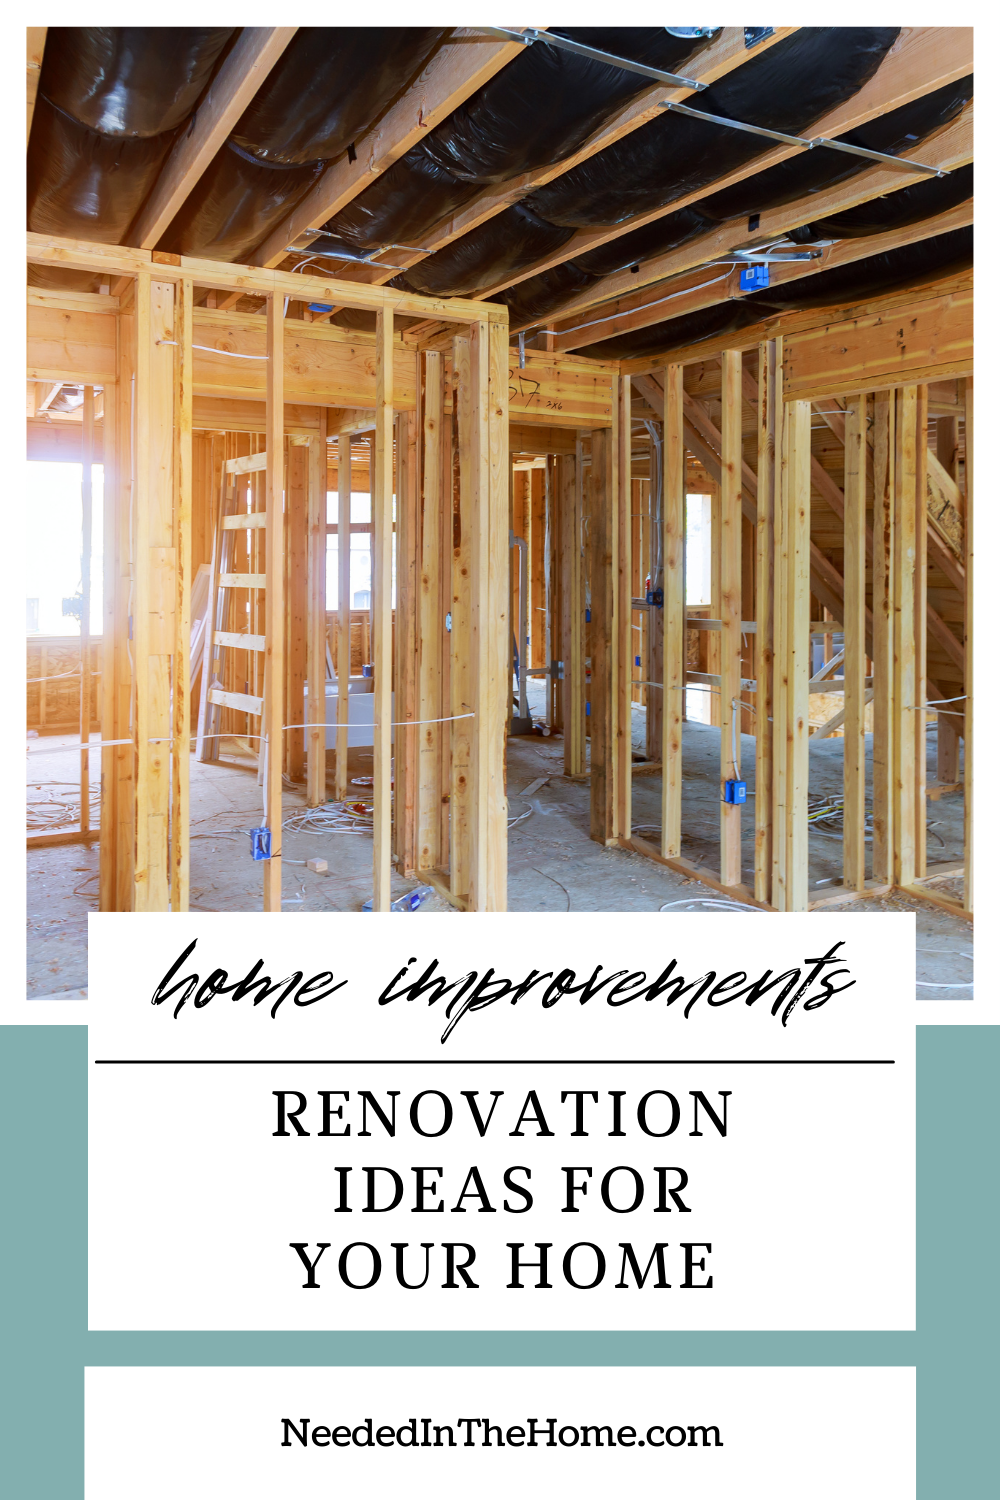 pinterest-pin-description skeleton rooms with electricity in main floor of home being remodeled home improvements renovation ideas for your home neededinthehome